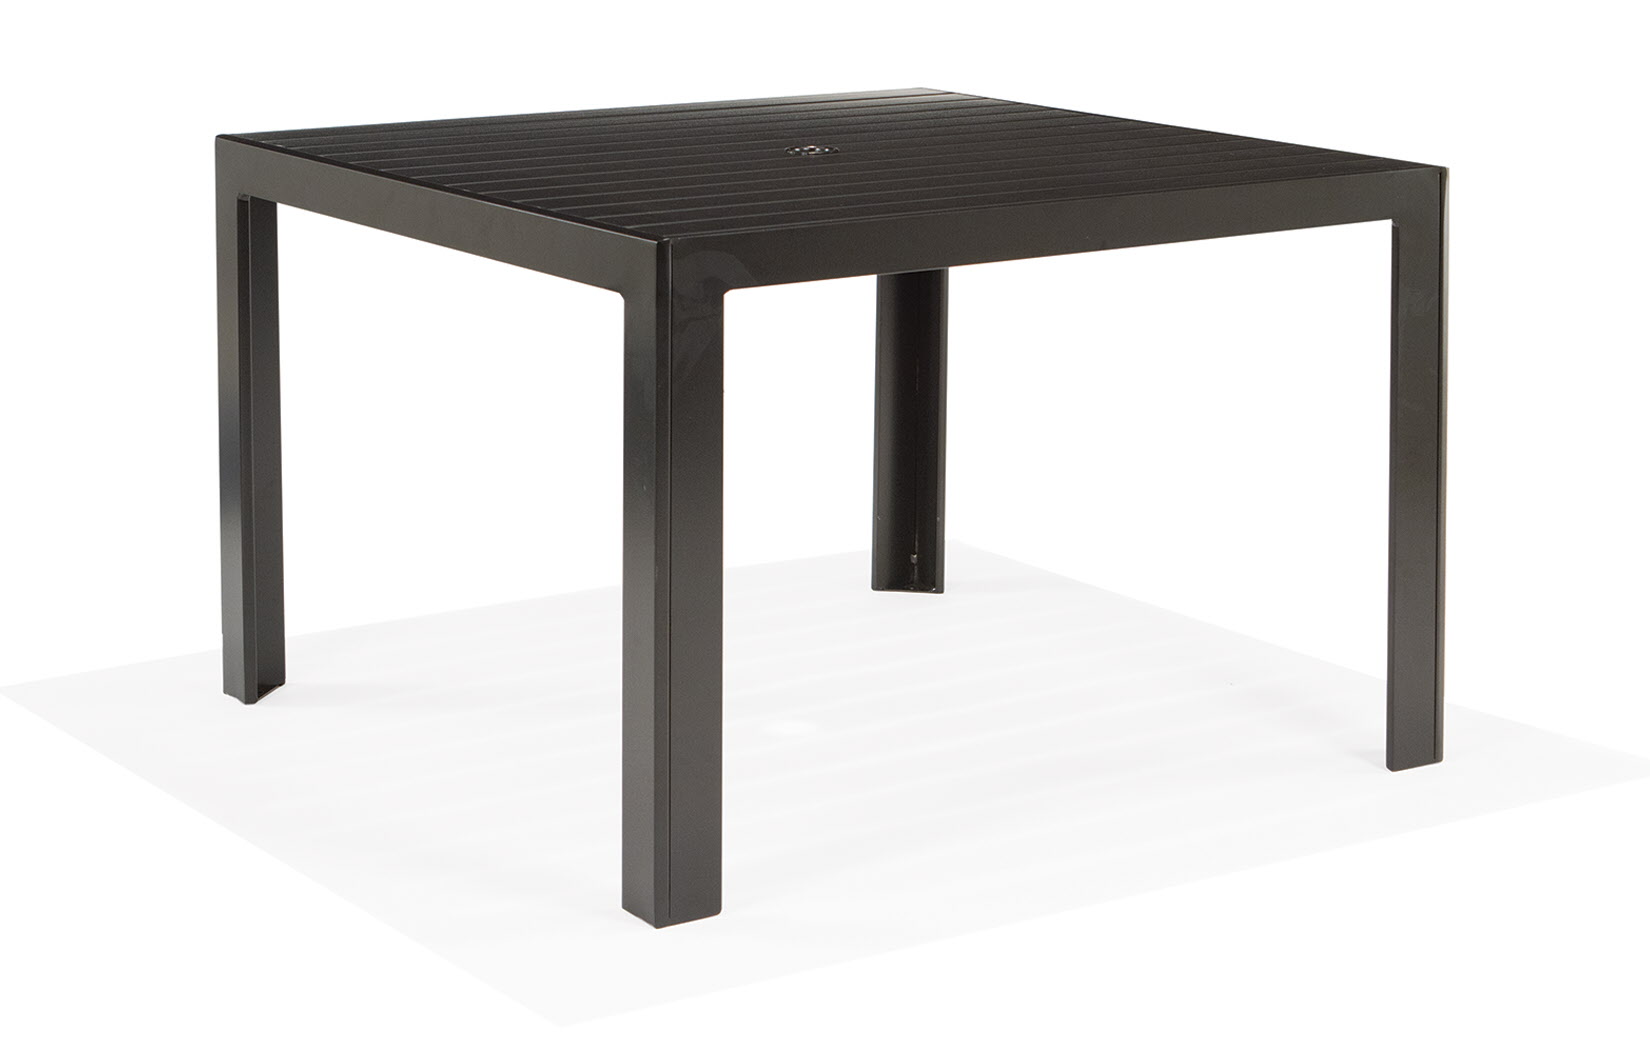 Meza Collection 48 Inch Square Dining Table